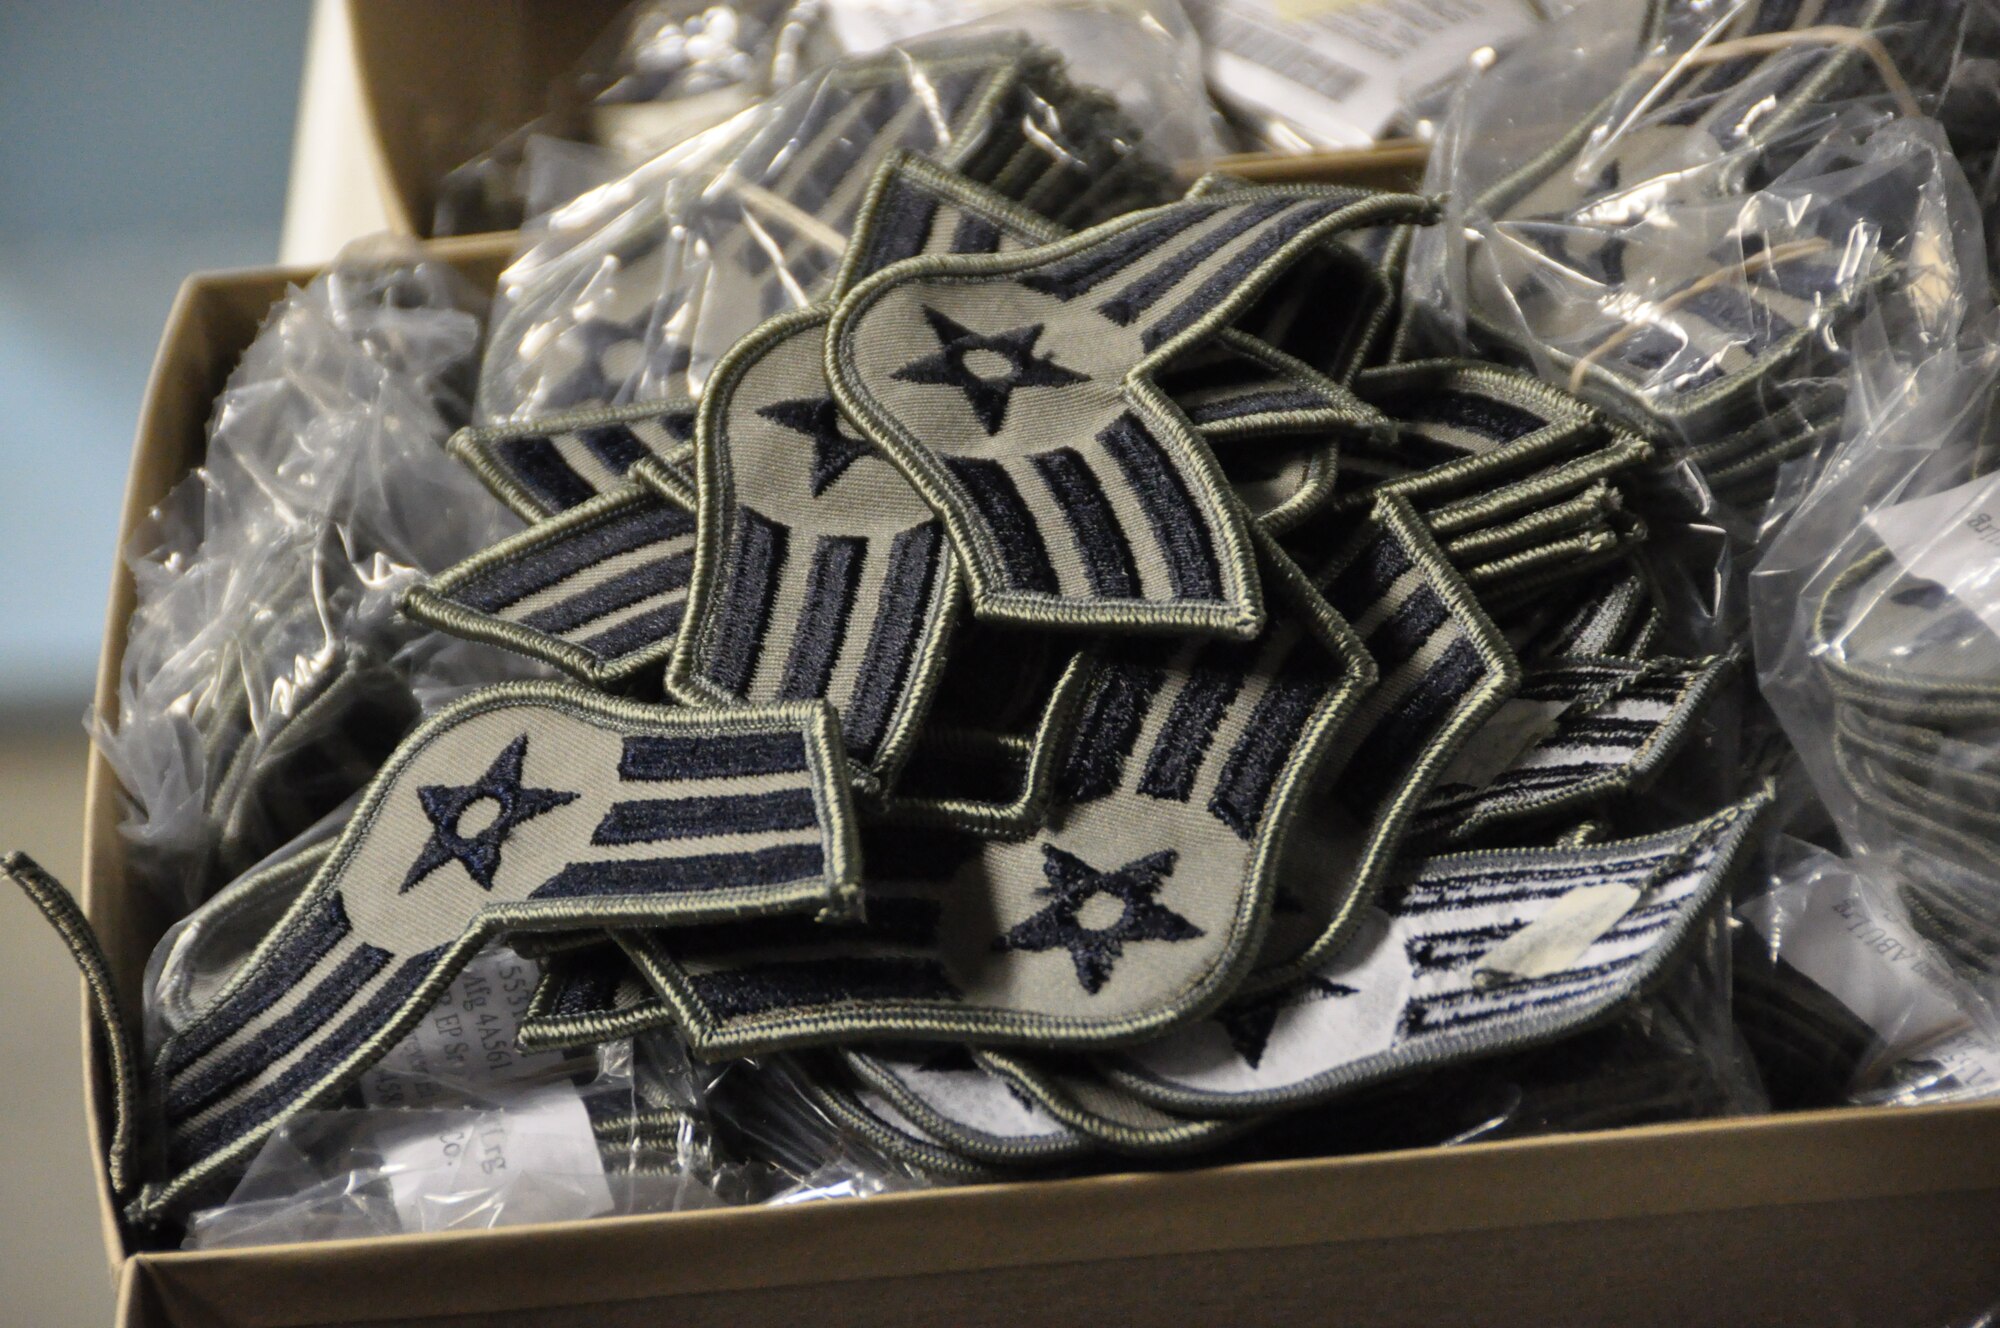 A box of ABU Senior Airman stripes awaits distribution in the supply warehouse at the 128th Air Refueling Wing.  Since the summer of 2009, Airmen at Milwaukee’s Air Guard Wing have been transitioning from the Battle Dress Uniform to the ABU.  Over 900 Airmen will receive 4 complete sets of the new uniform. (US Air Force Photo by: SSgt Nathan Wallin)